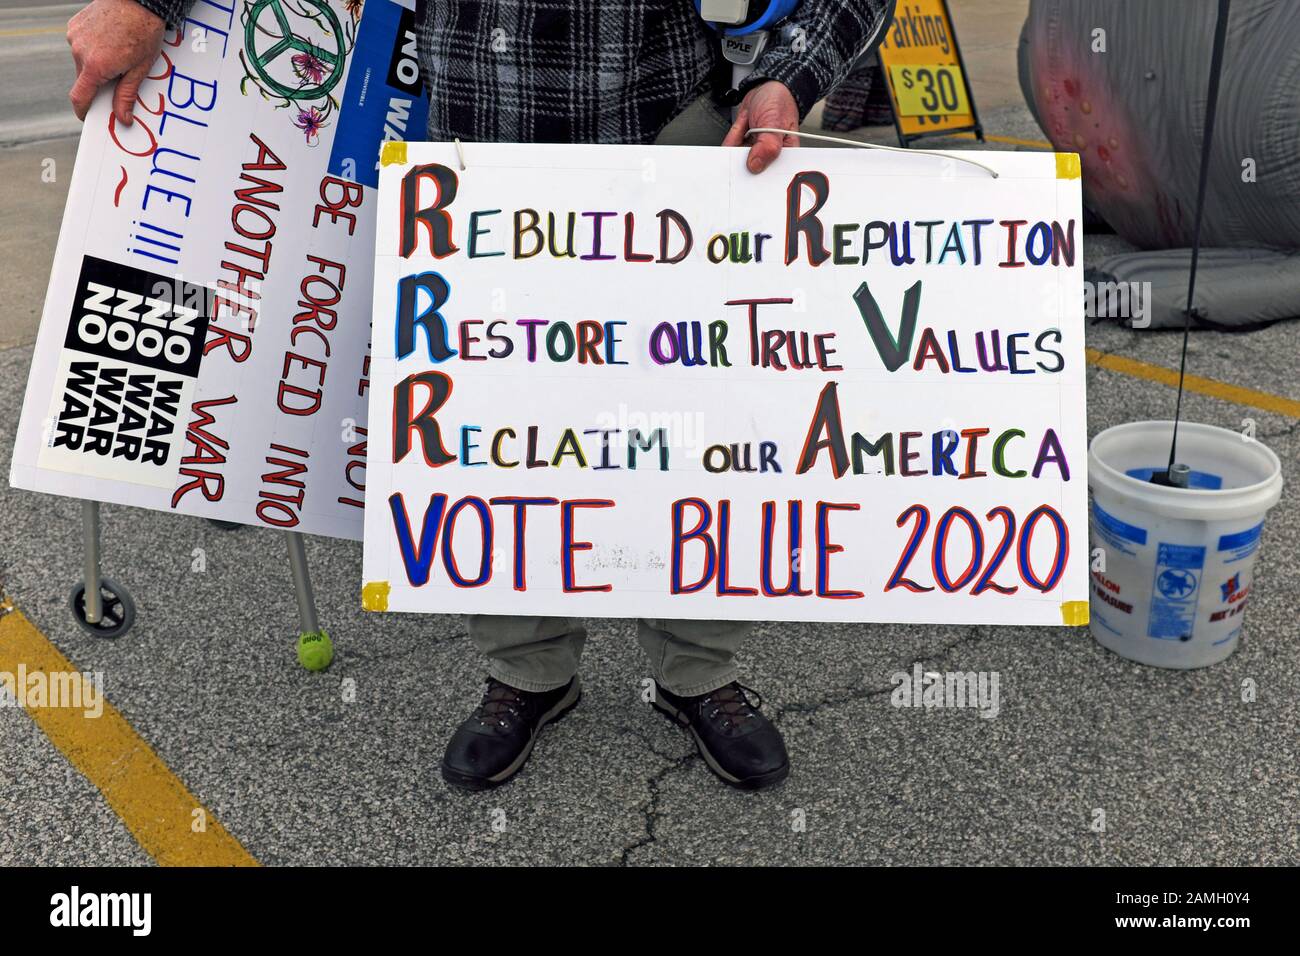 Political sign stating 'Rebuild our reputation, restore our true values, reclaim our America, vote blue 2020' alludes to dissatisfaction with the GOP. Stock Photo